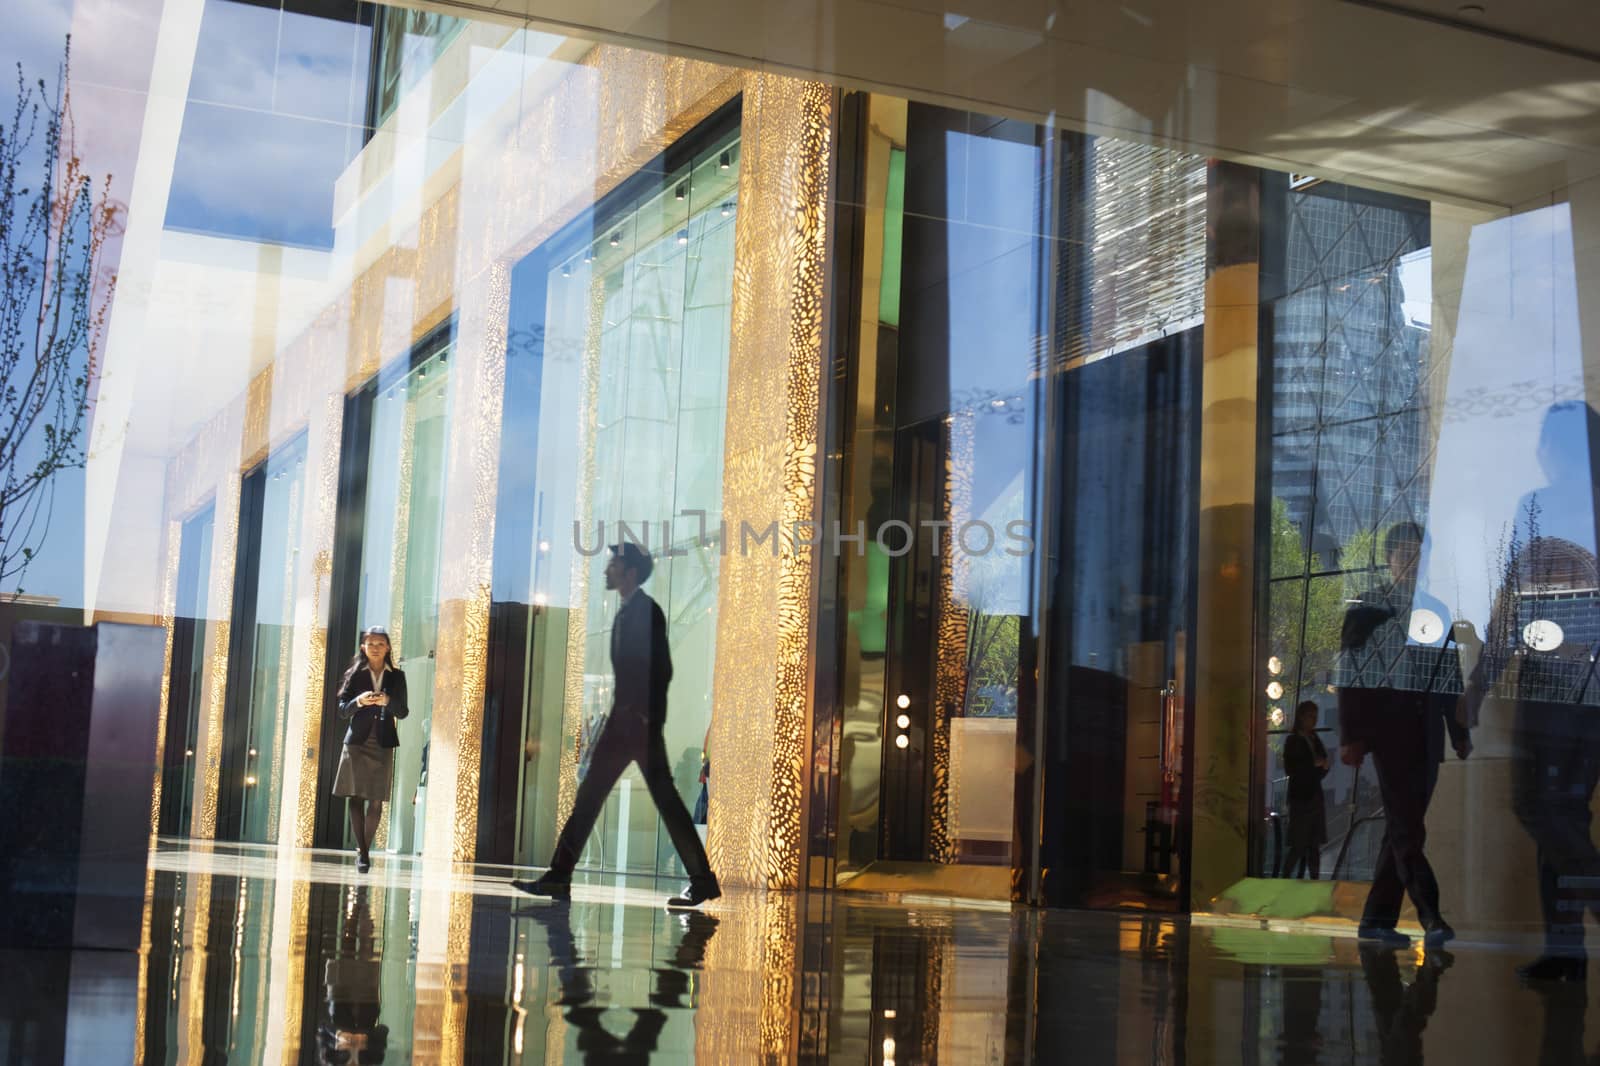 Business People walking through the lobby of an office building on the other side of a glass wall